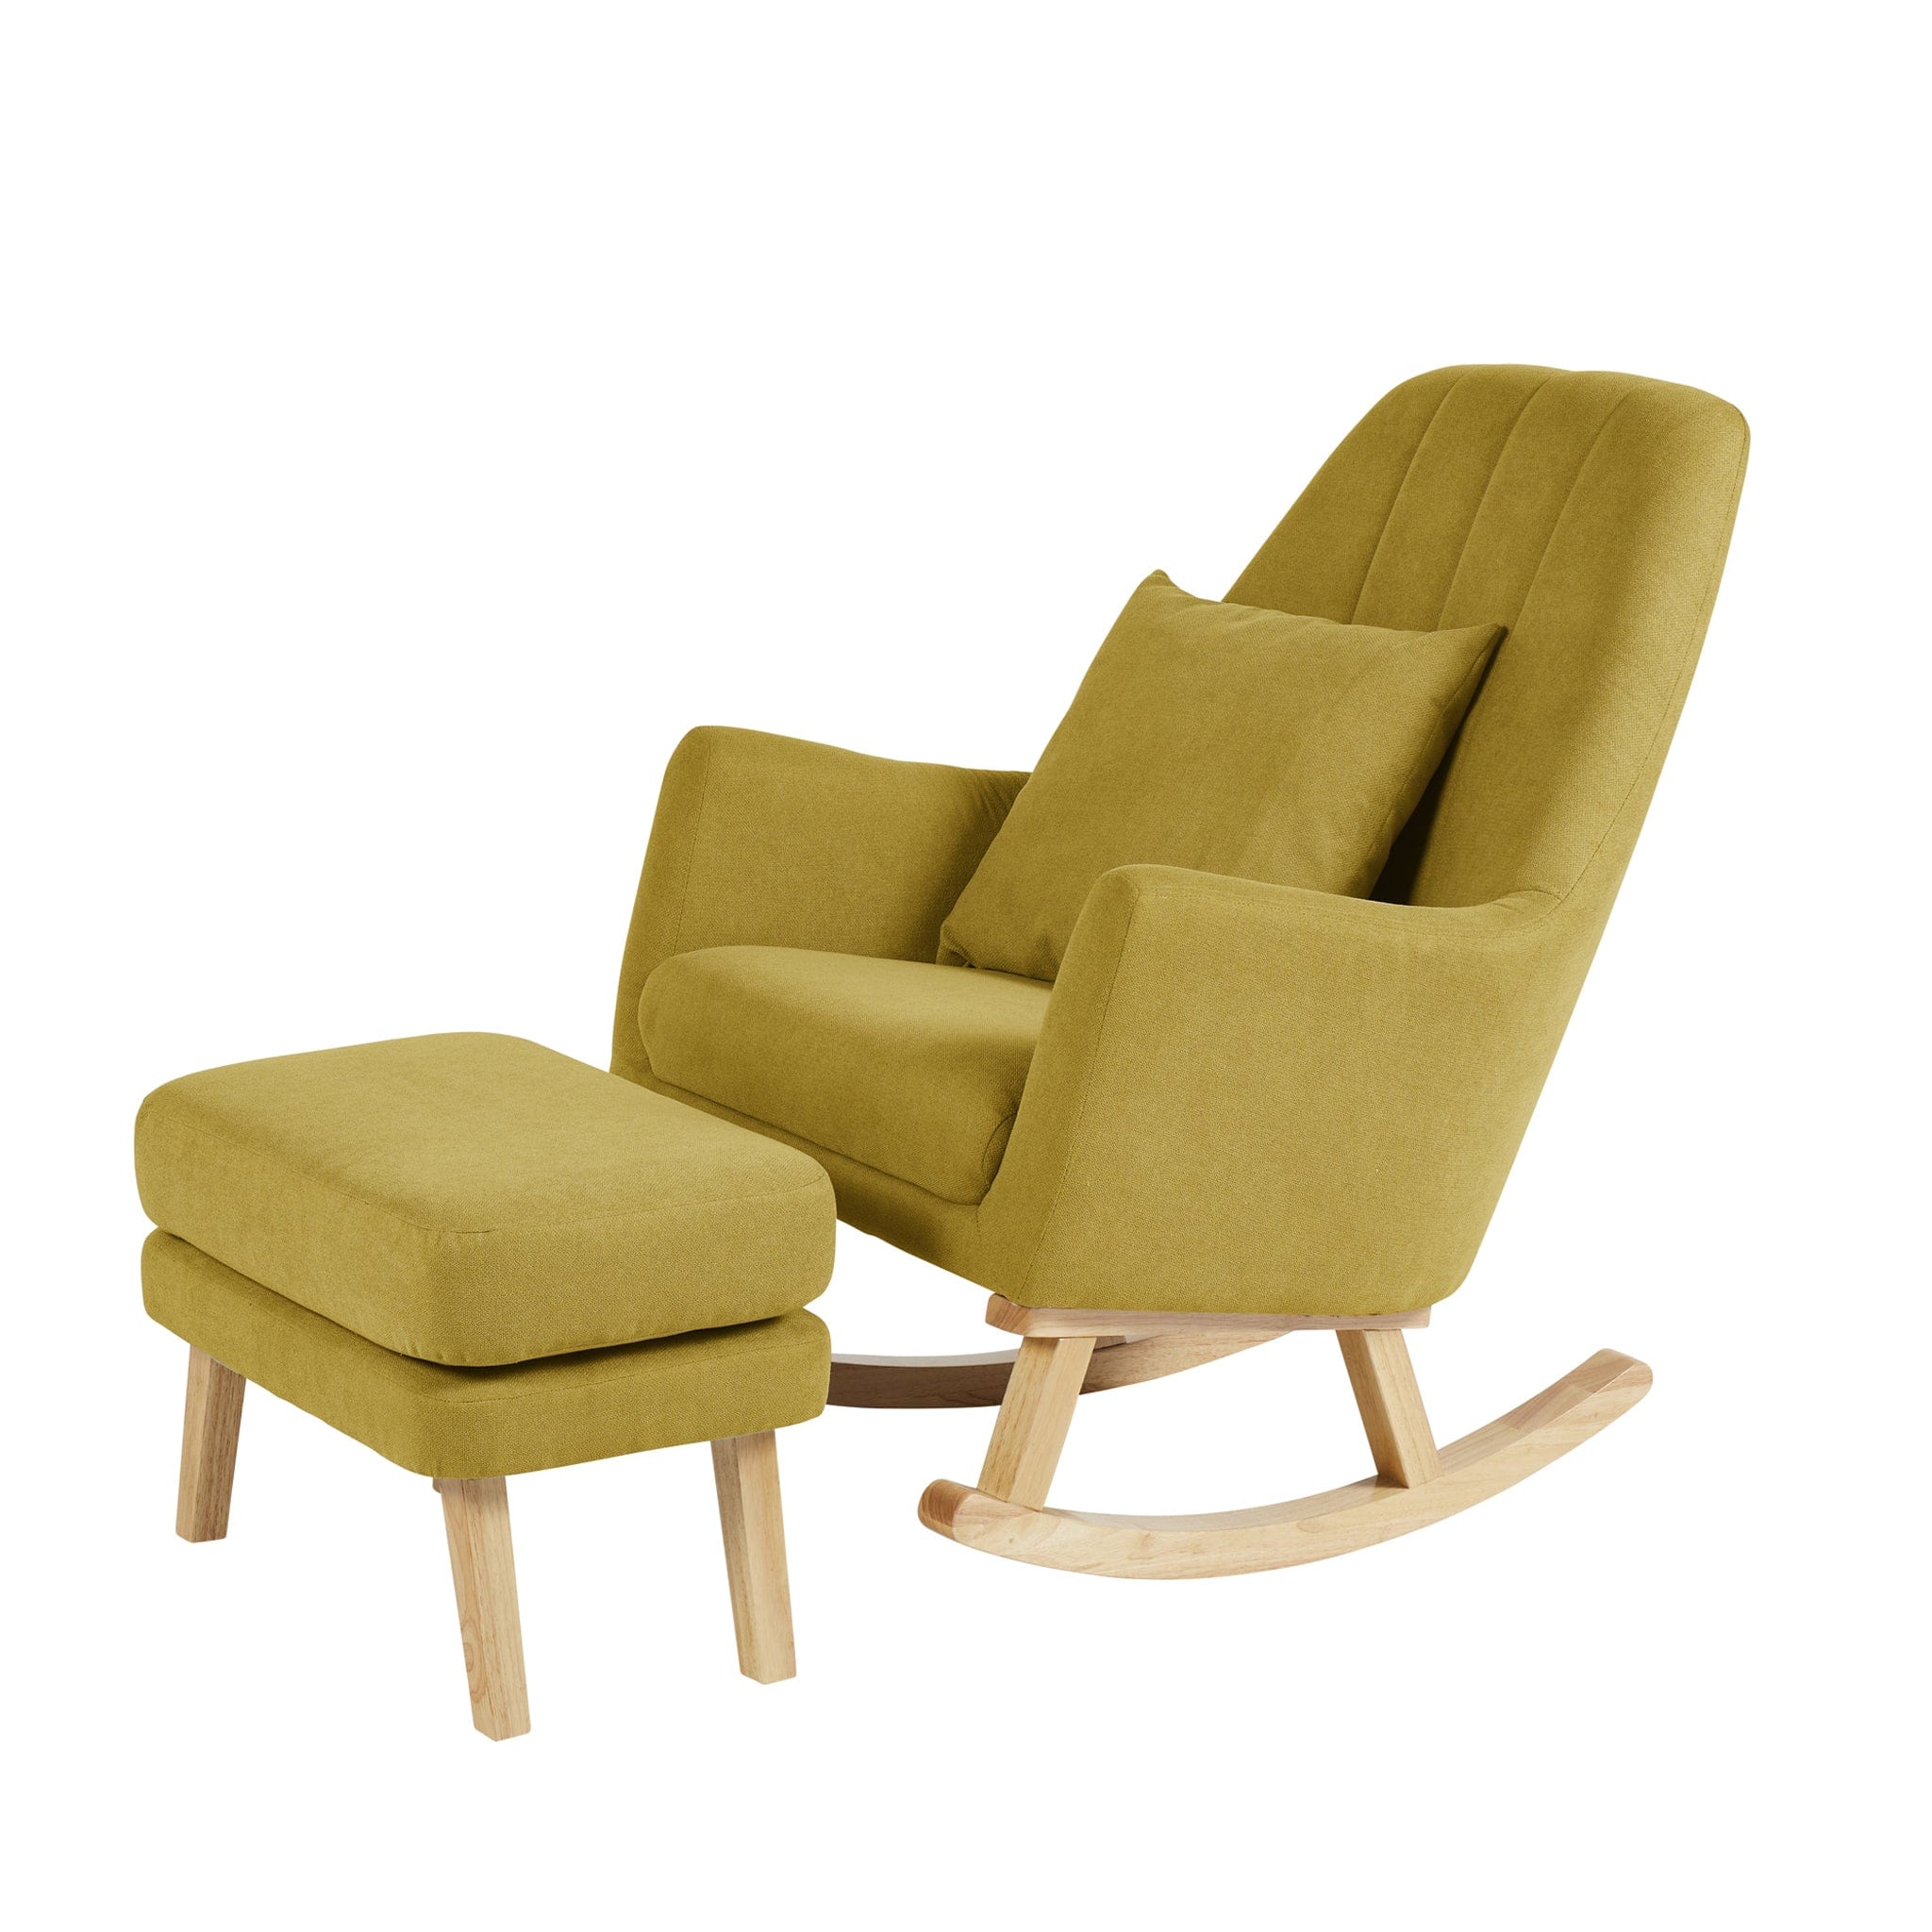 Ickle Bubba Nursing Chairs Ickle Bubba Eden Deluxe Nursery Chair and Stool Ochre 48-008-000-845